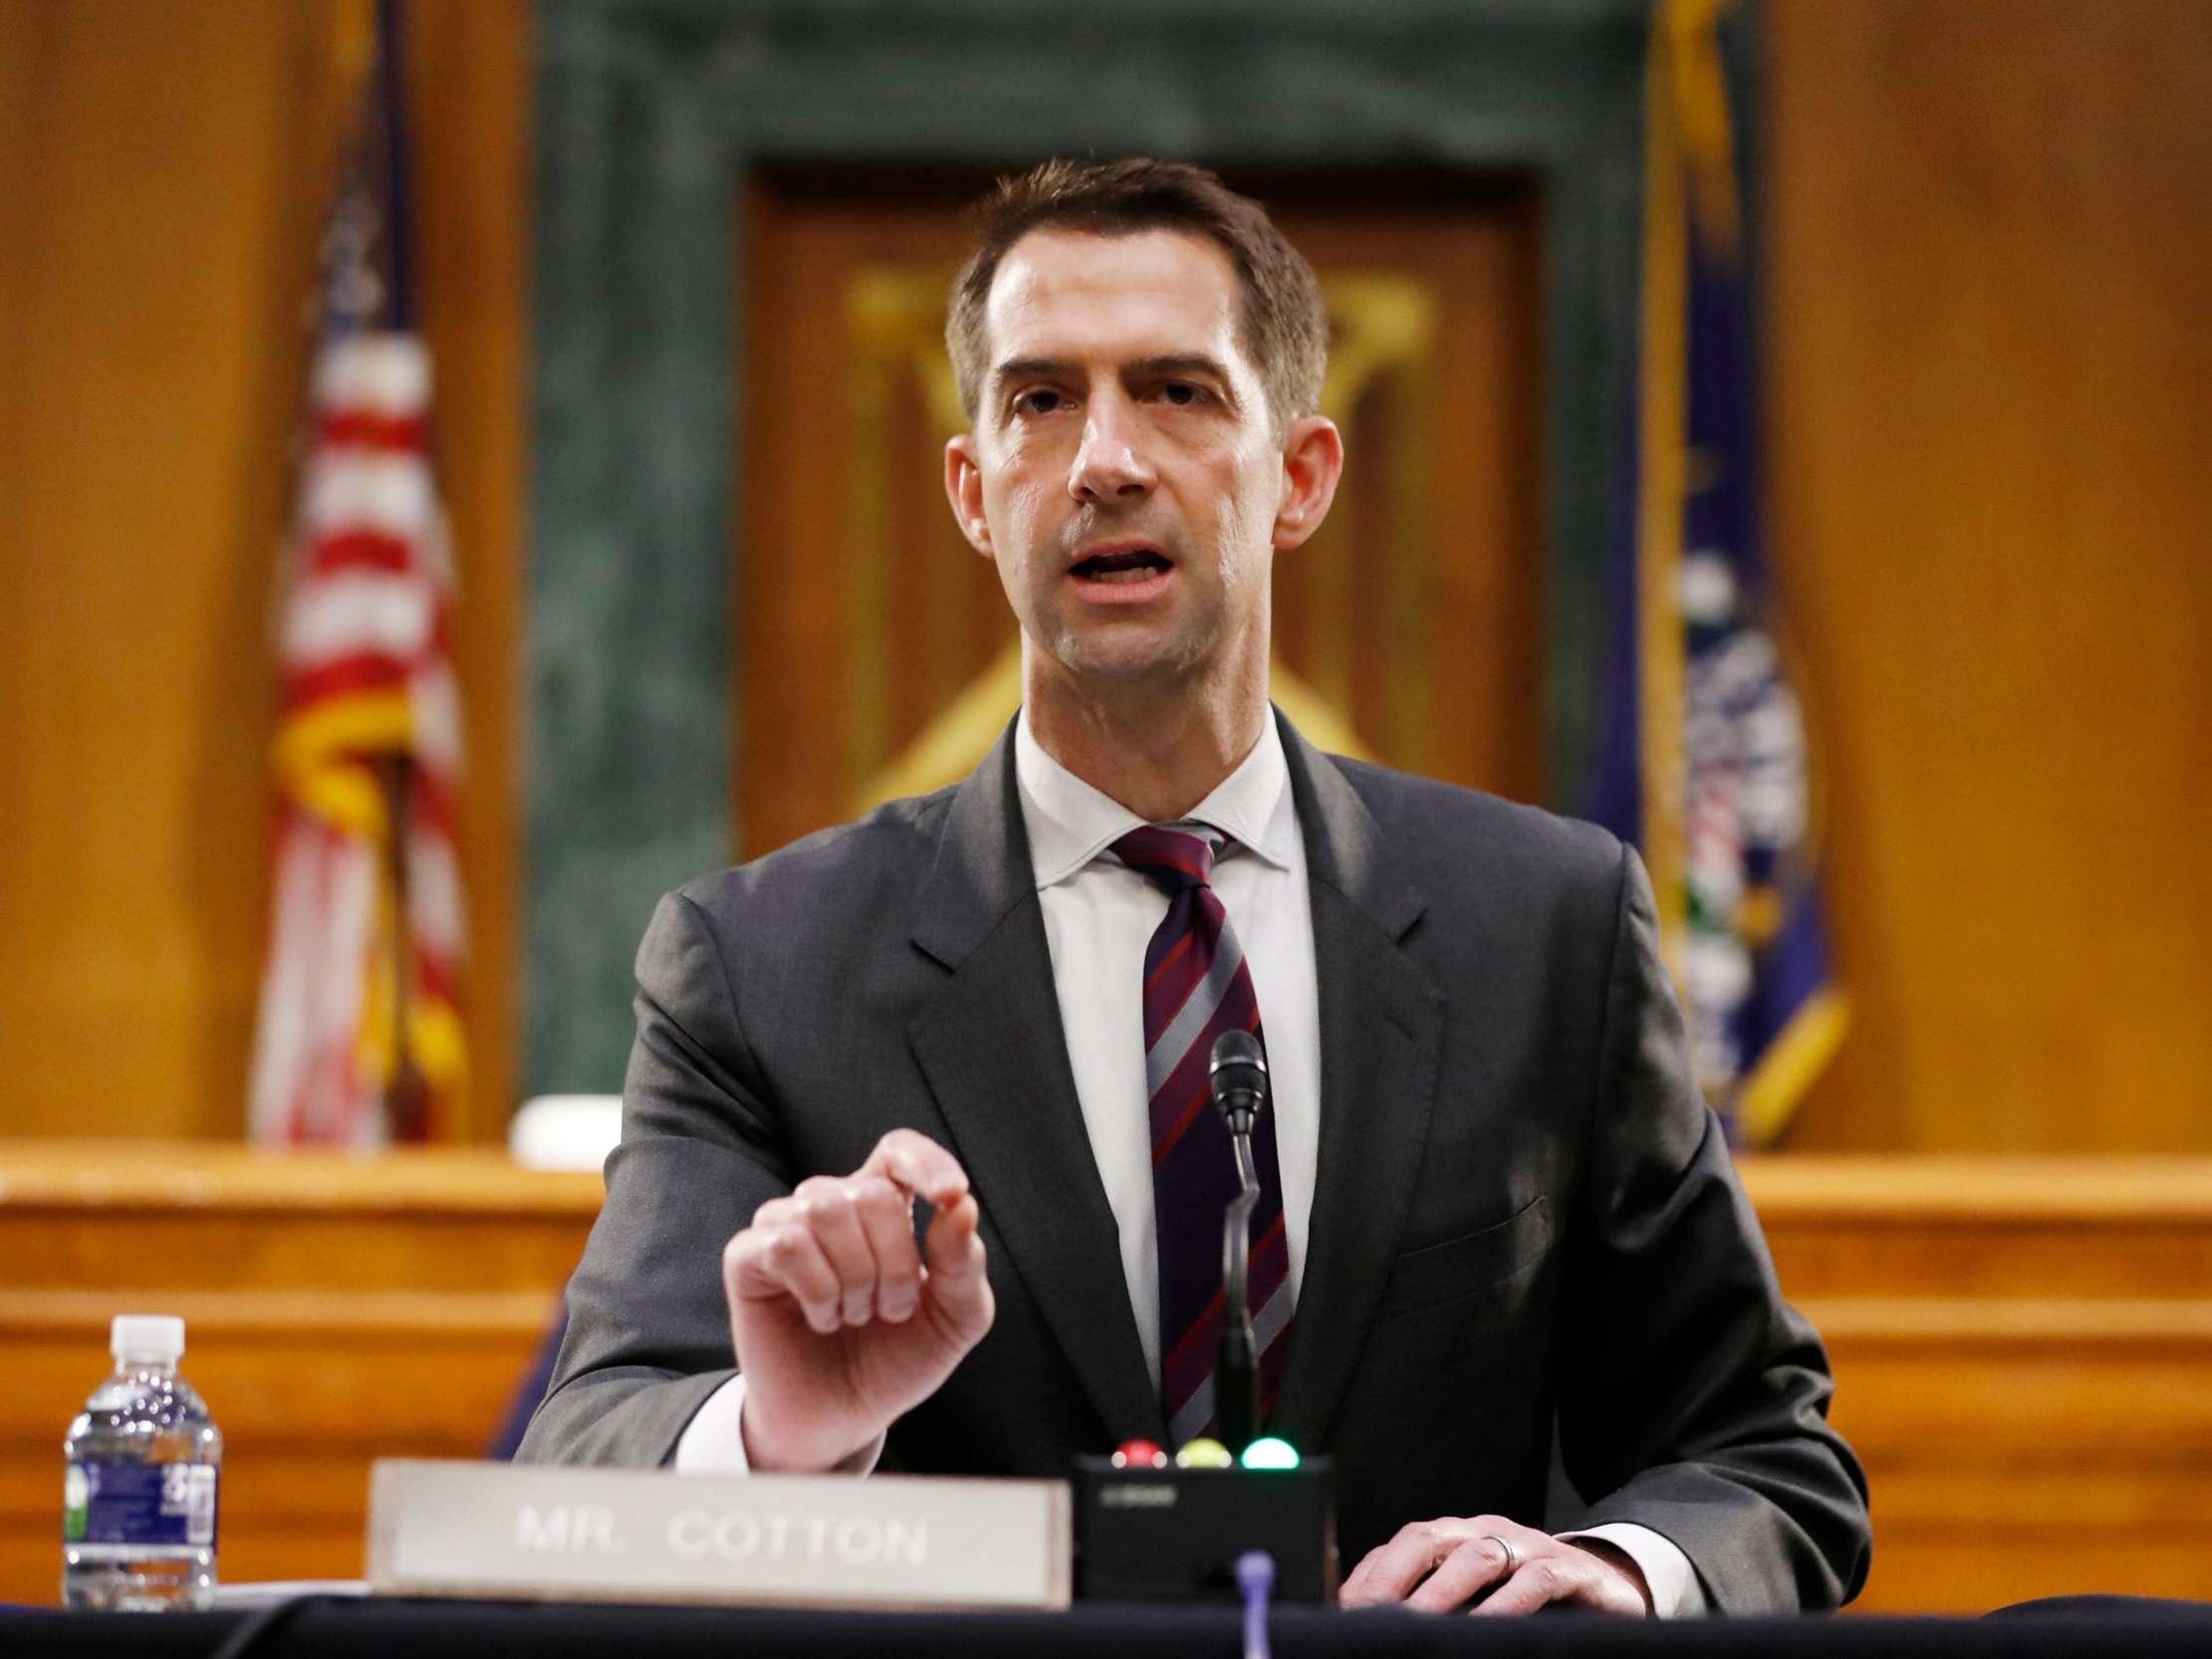 Tom Cotton is a Republican senator in the state of Arkansas